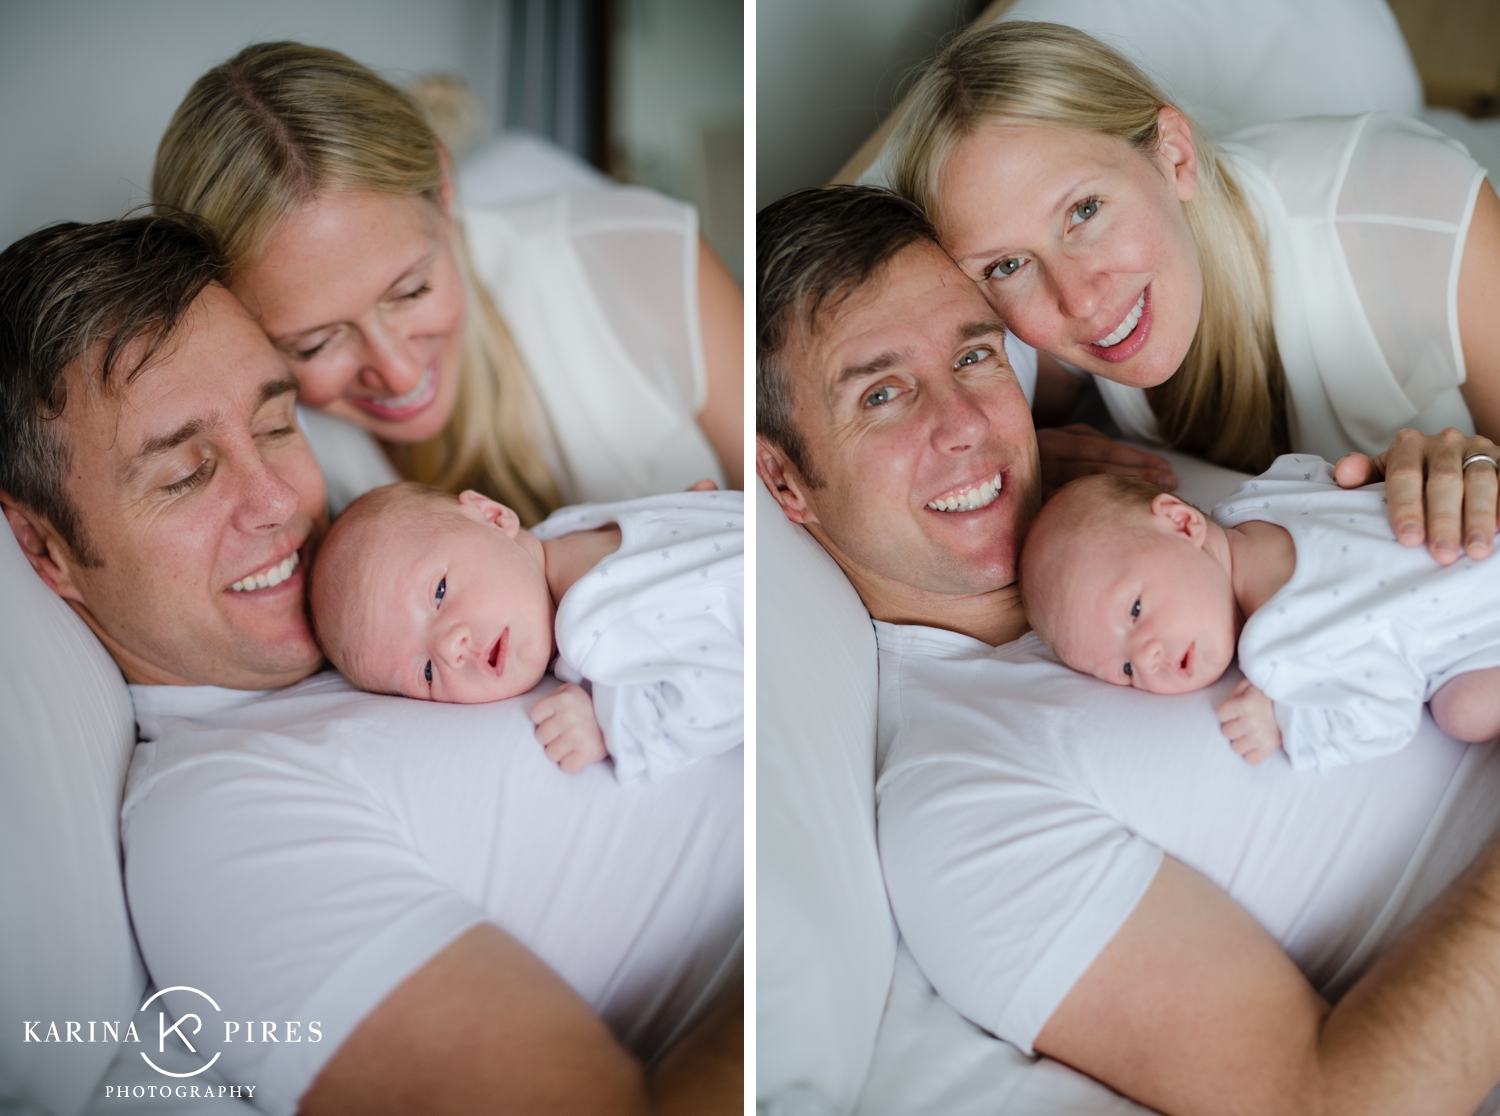 Dominique Newborn Session in Los Angeles | Karina Pires Photography